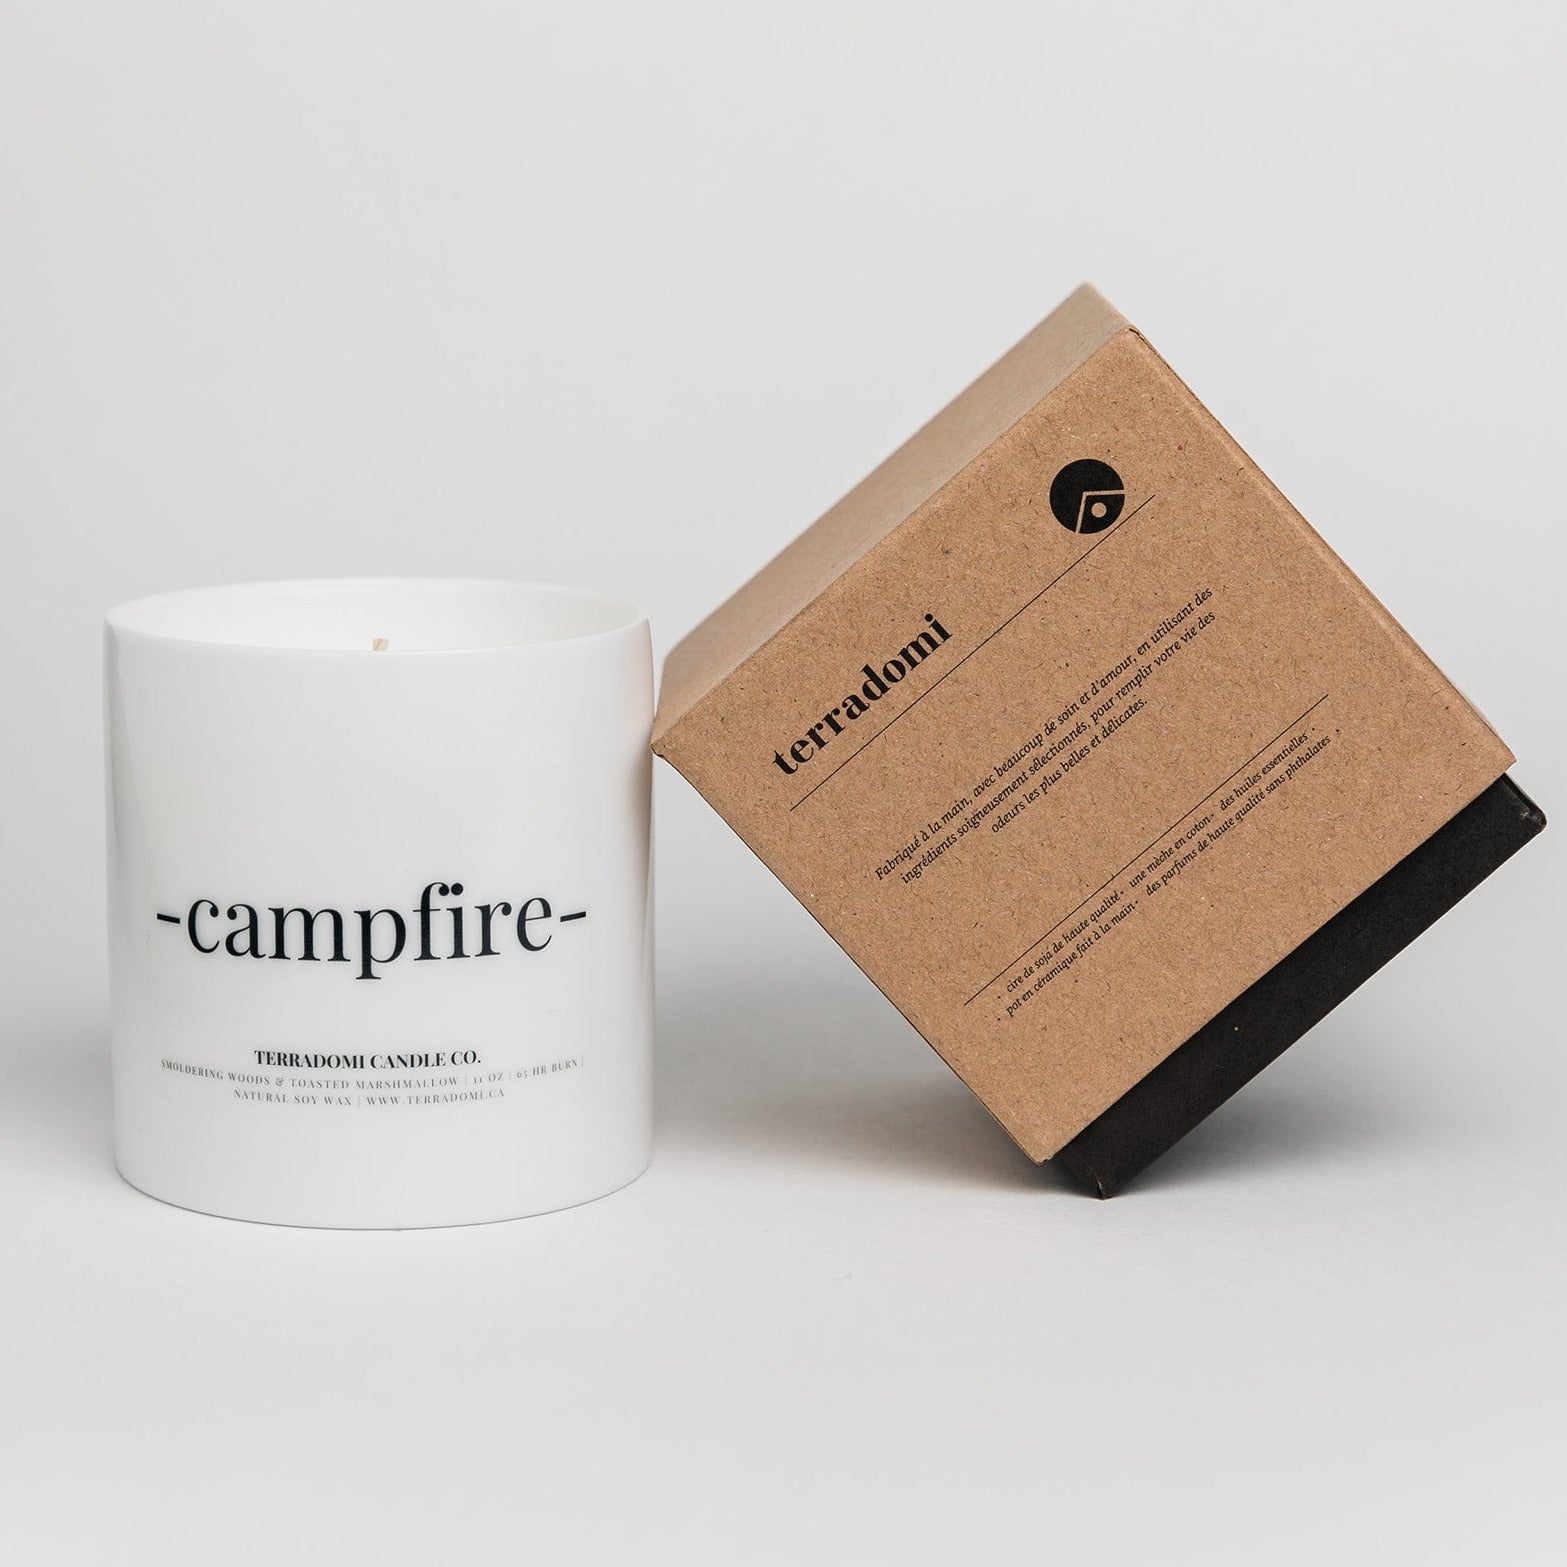 Terradomi campfire candle with marshmallow and woods scent